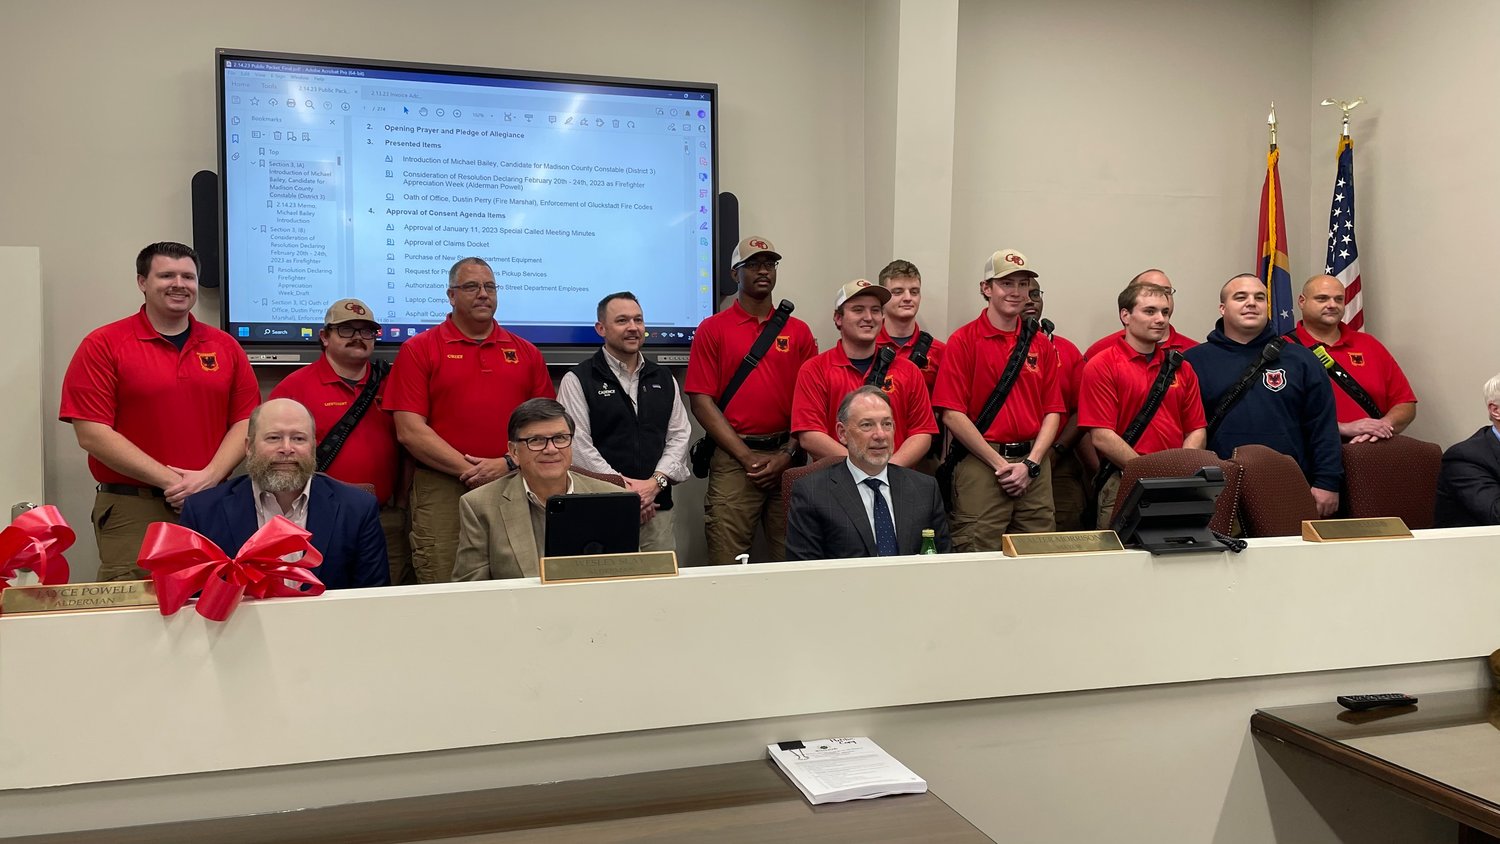 The City of Gluckstadt adoption a resolution Tuesday night that declared the week of Feb. 20 - 24 as Firefighter Appreciation Week. Members of the Gluckstadt Fire Department attended the meeting and were recognized for all the work they do for the community.